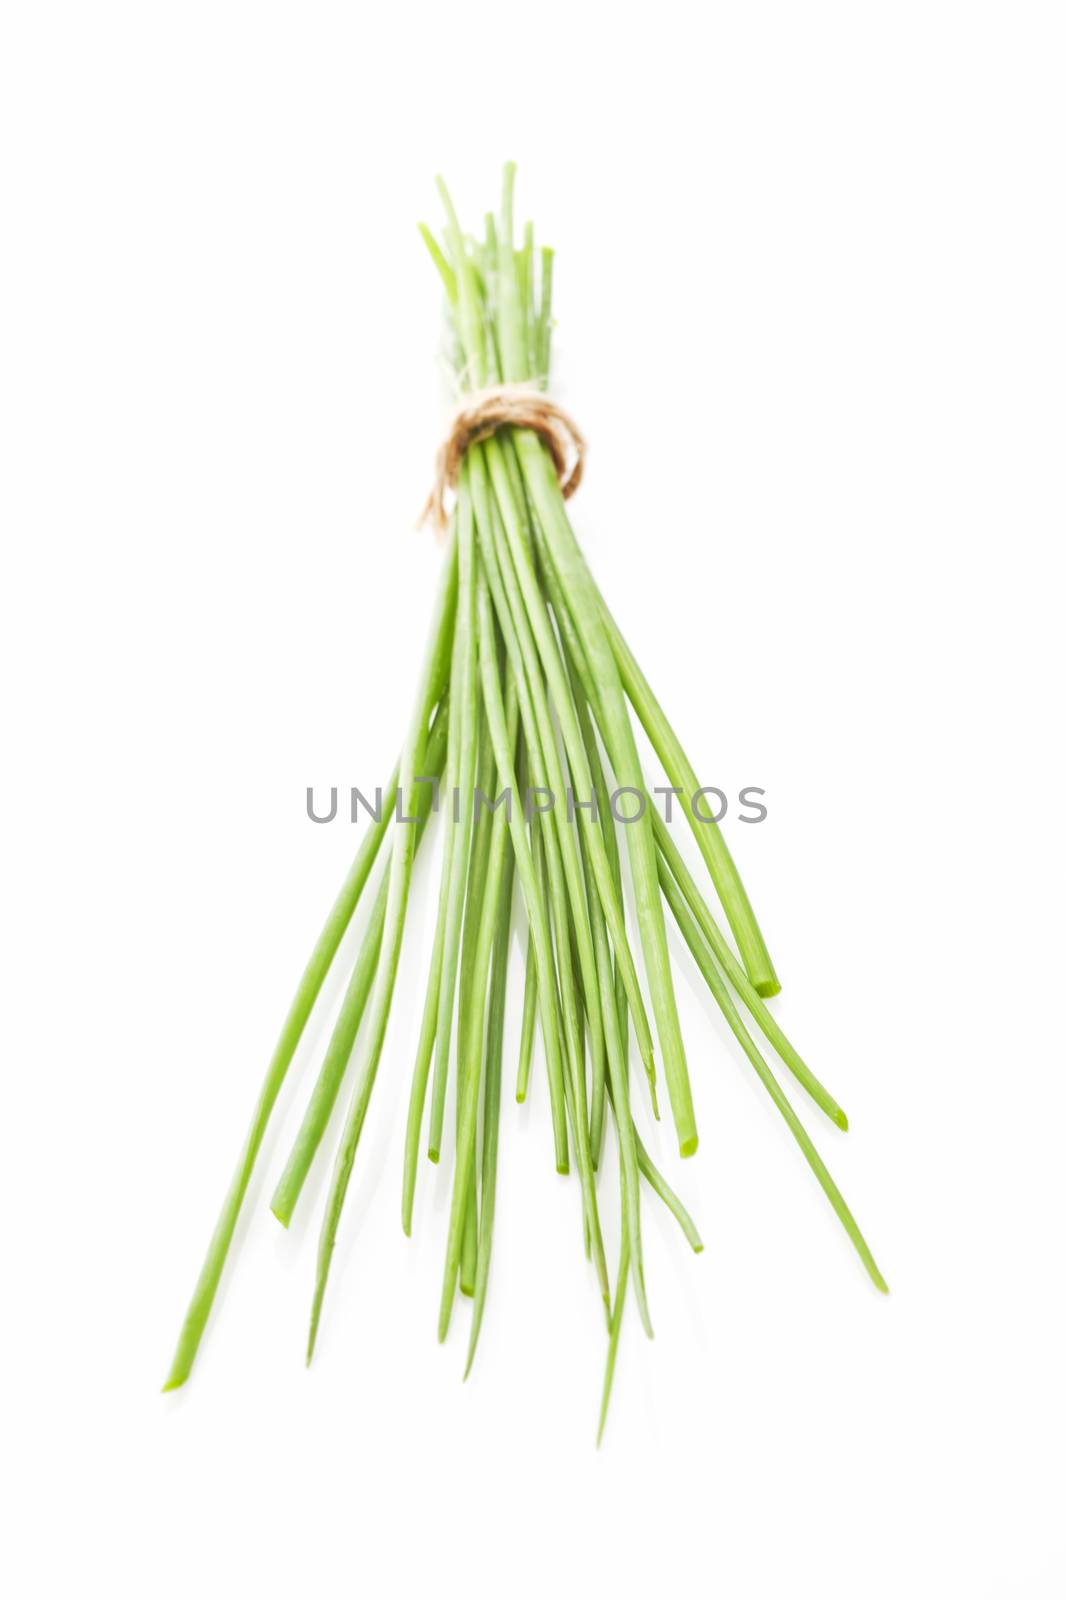 Fresh raw organic chive bunch isolated on white background. Aromatic culinary herb concept.